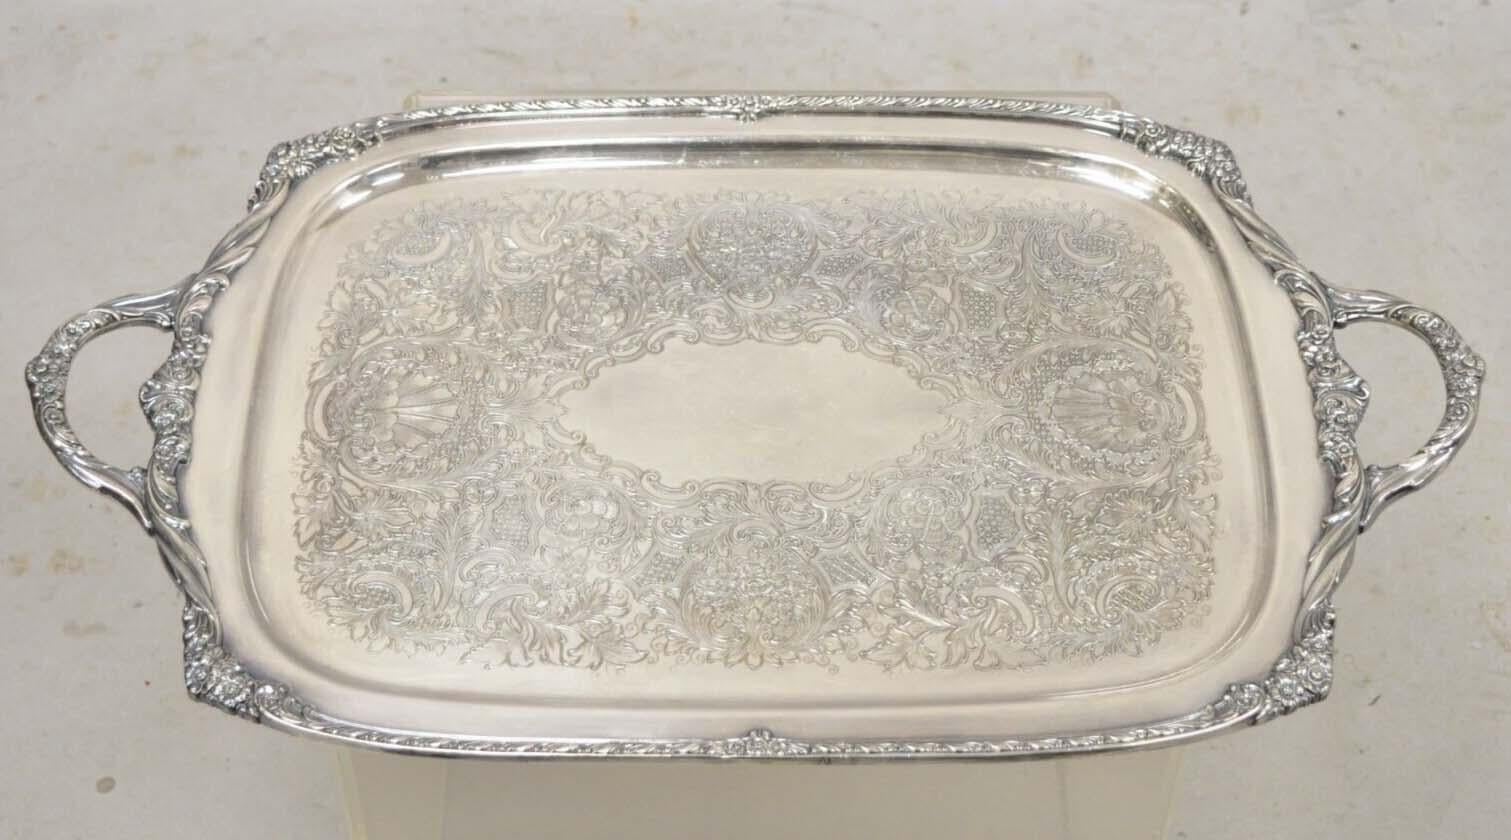 Vintage Heritage 1847 Rogers Bros 9498 Silver Plated Serving Platter Tray. Circa Mid 20th Century. Measurements:  1.5